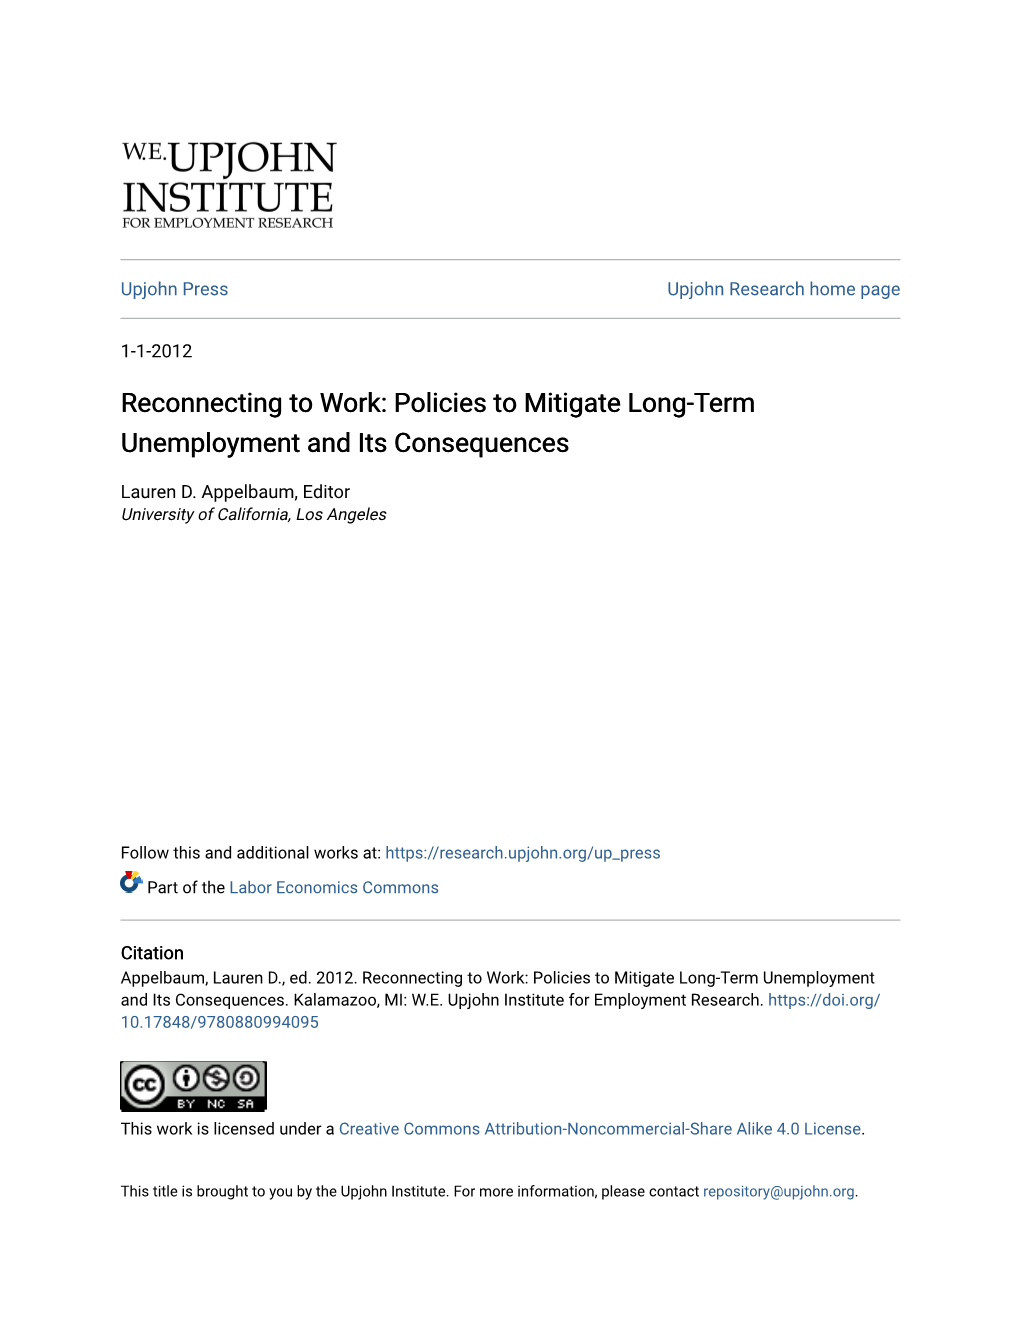 Policies to Mitigate Long-Term Unemployment and Its Consequences